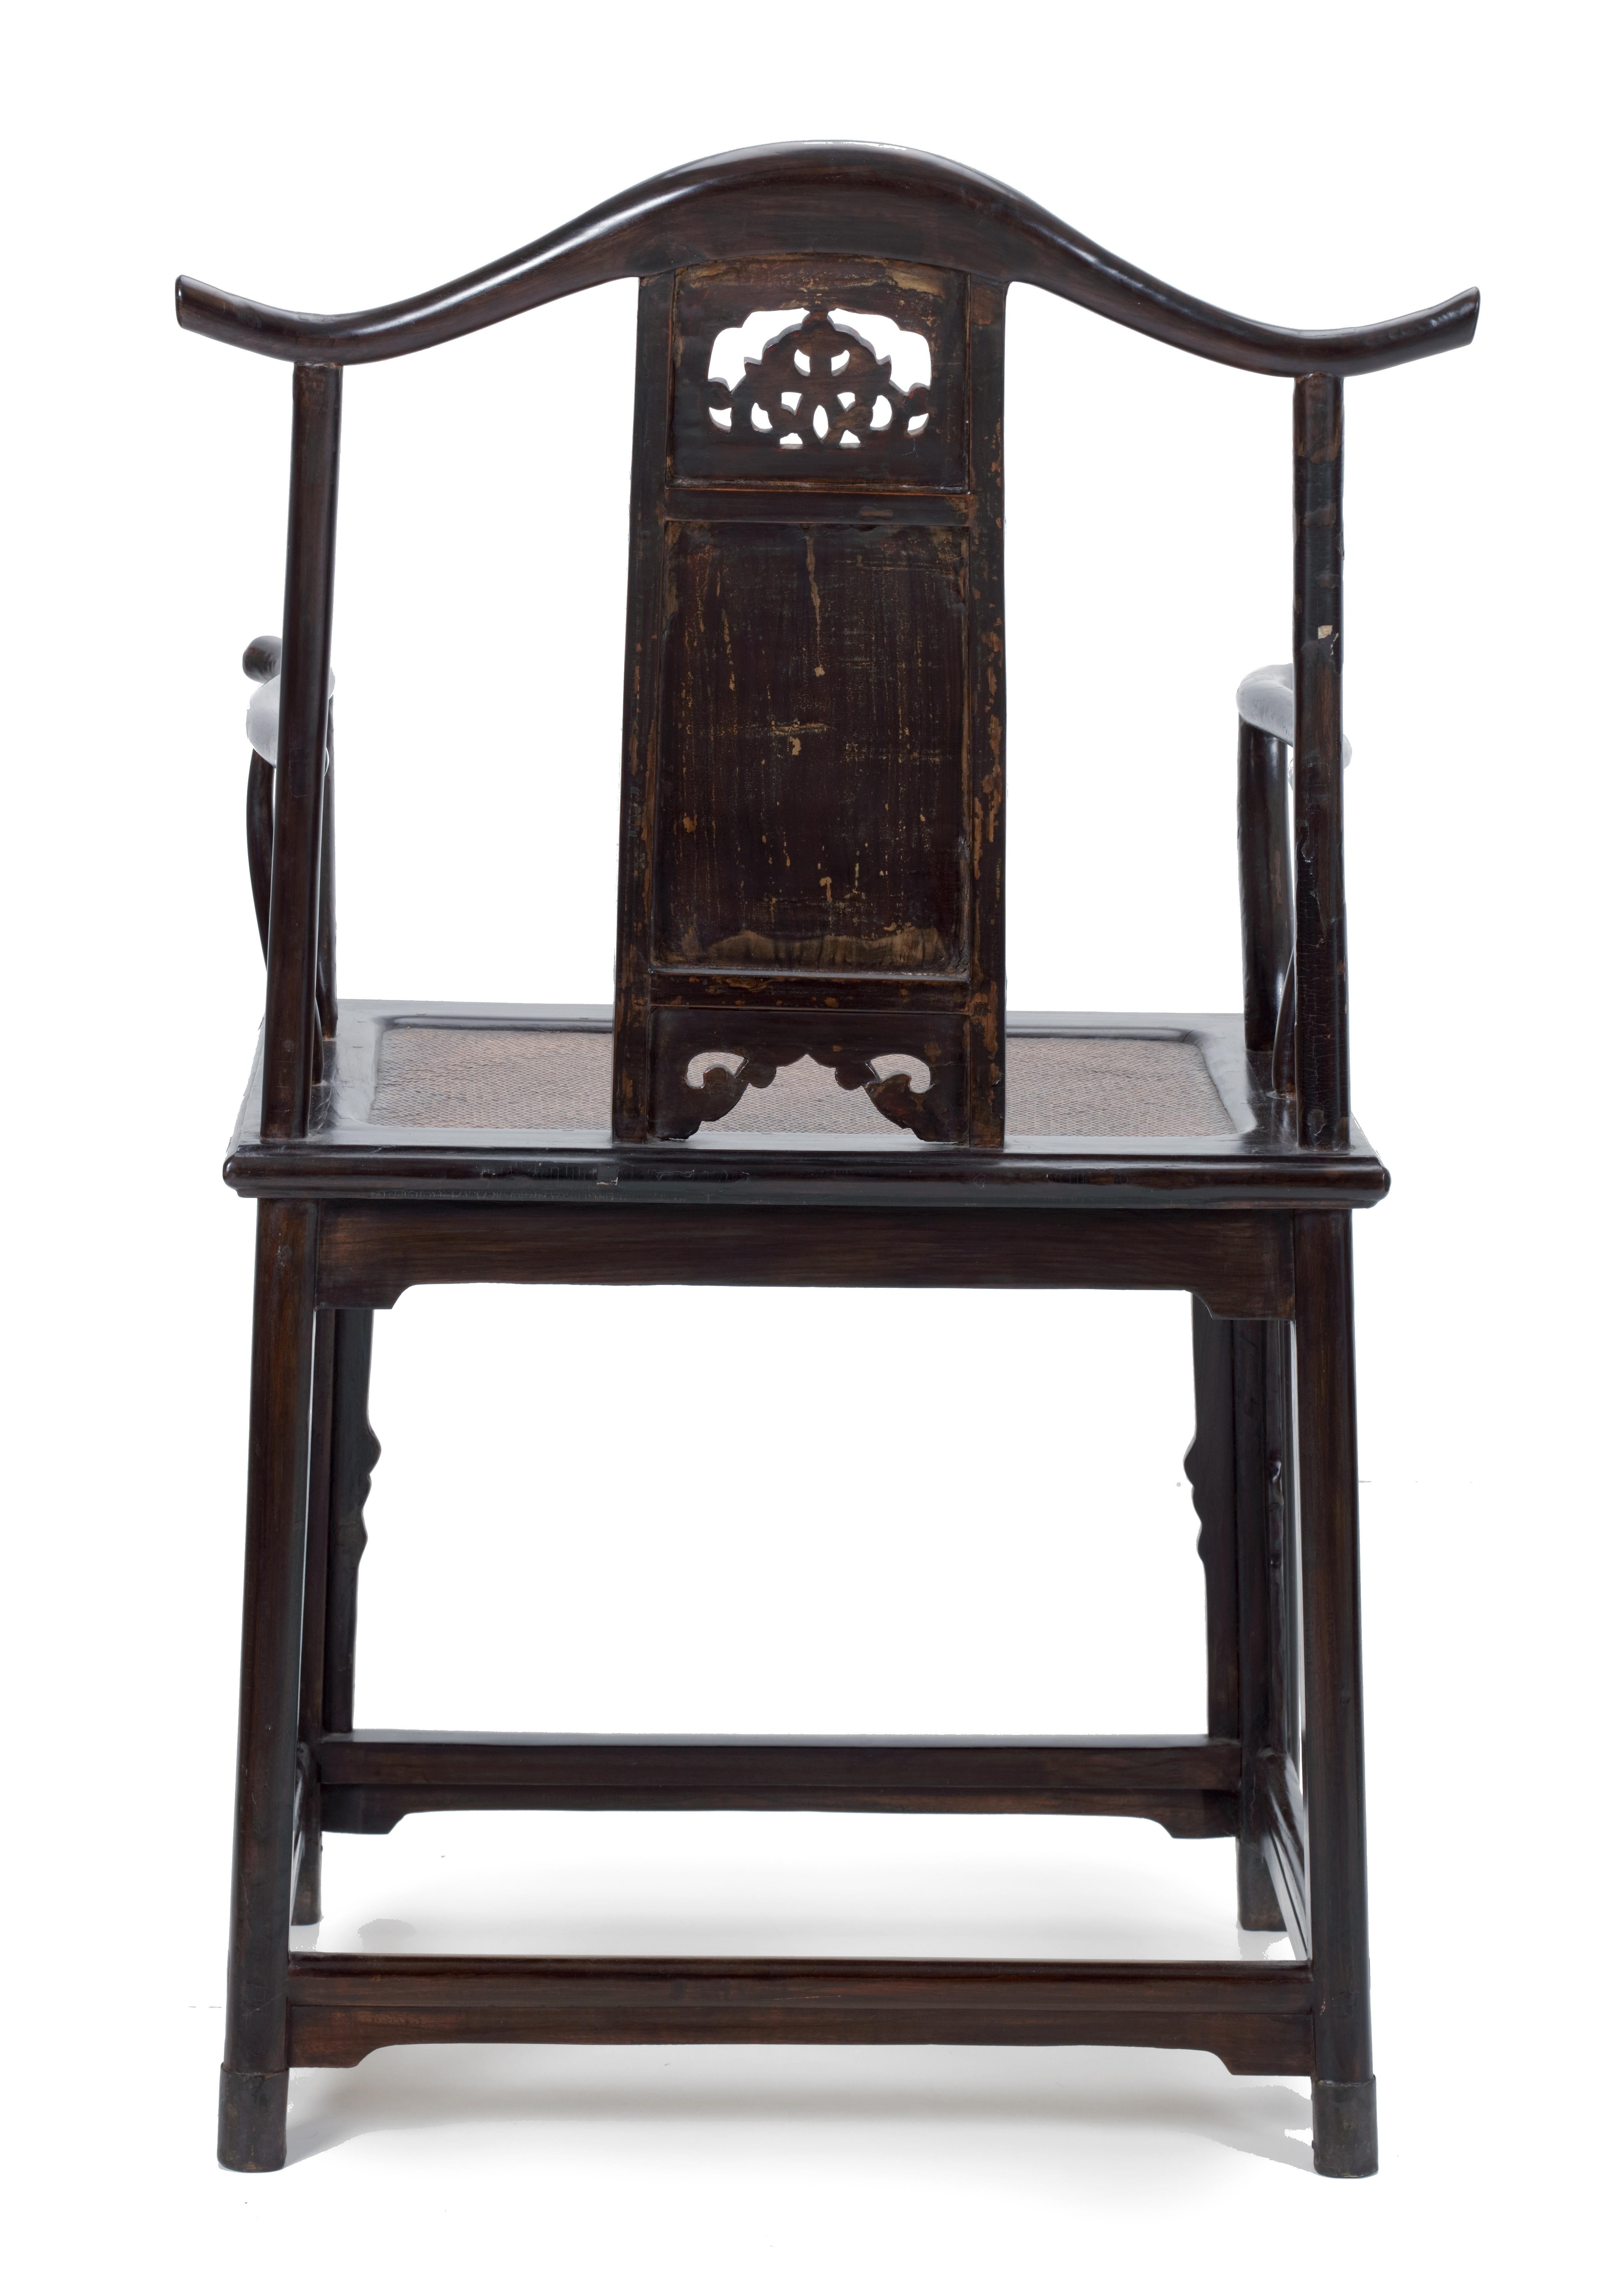 Qing Two 18th Century Lacquered Wood Chinese Yoke-Back Chairs, Chinoiserie Chique For Sale